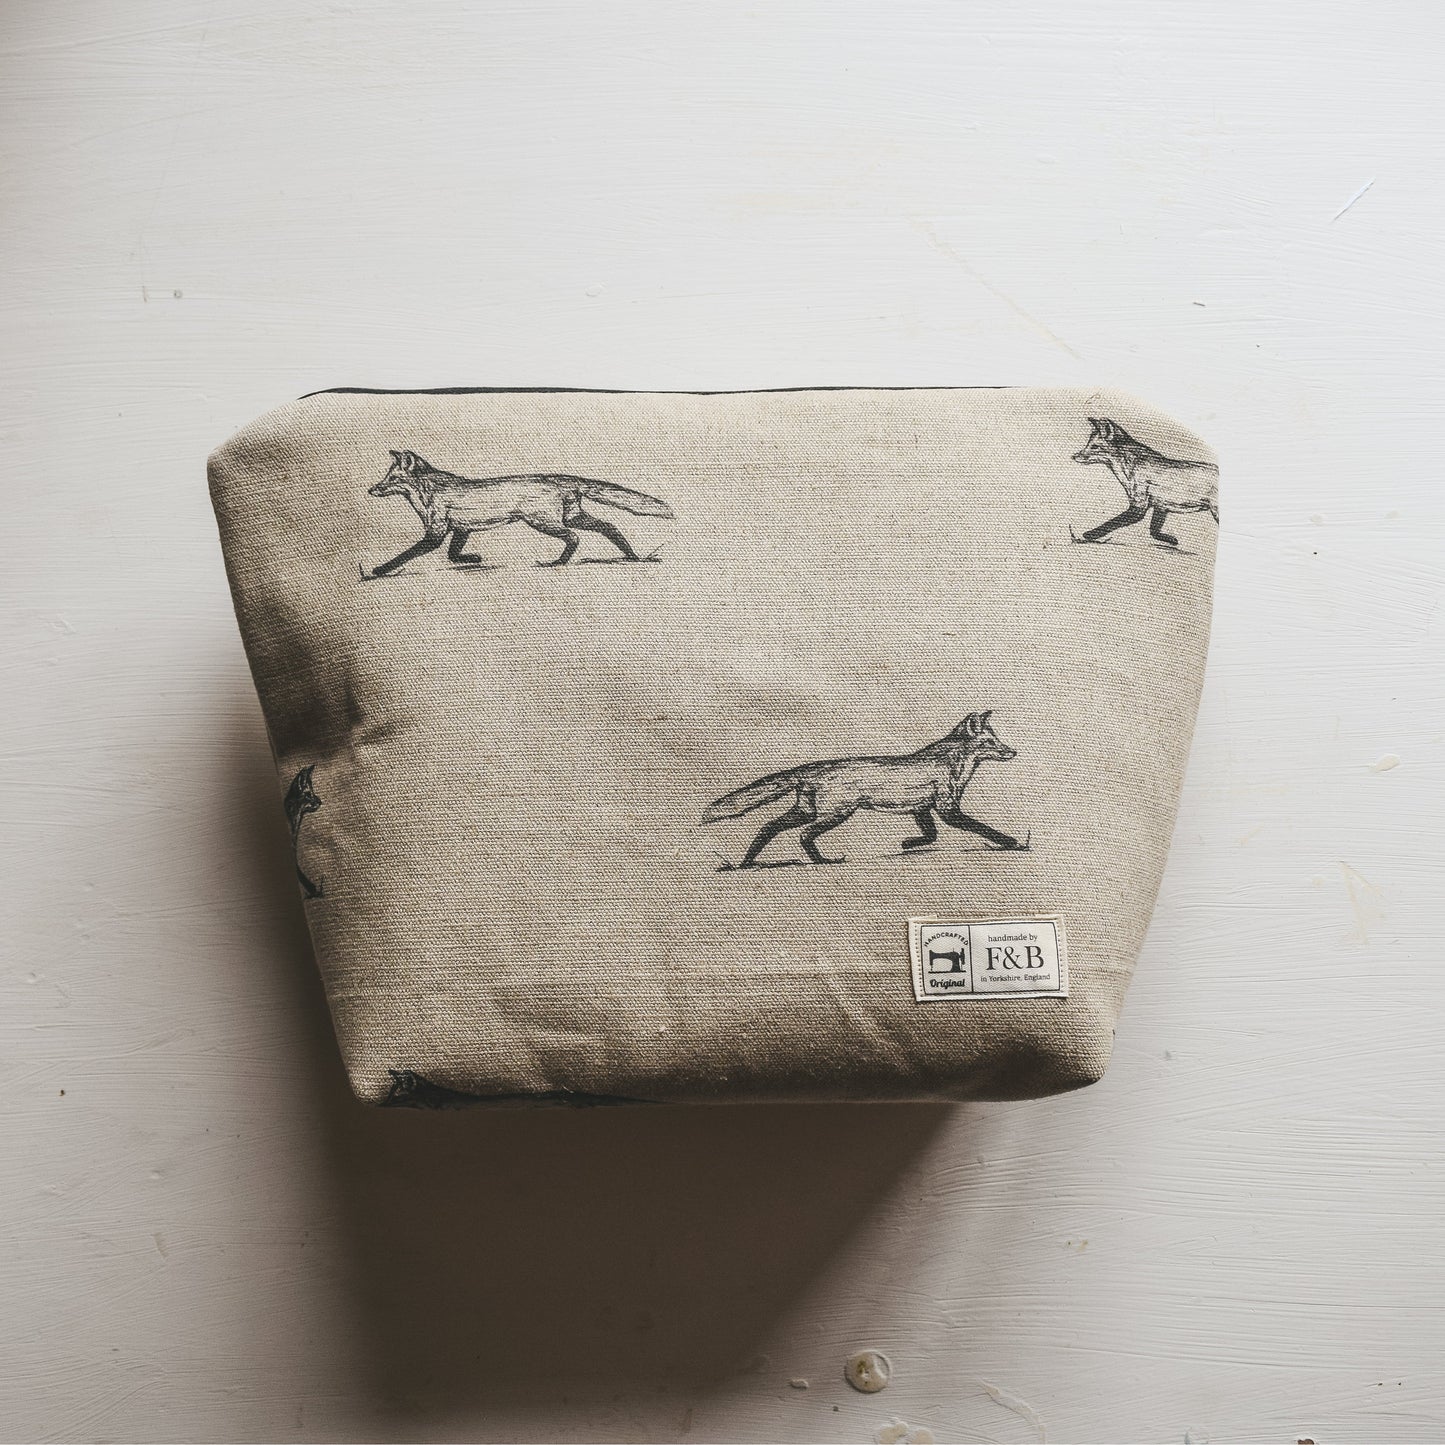 F&B Handmade Fox Print Linen Wash Bag or Make Up Bag - Made with Love by Beth and Waterproof Lined